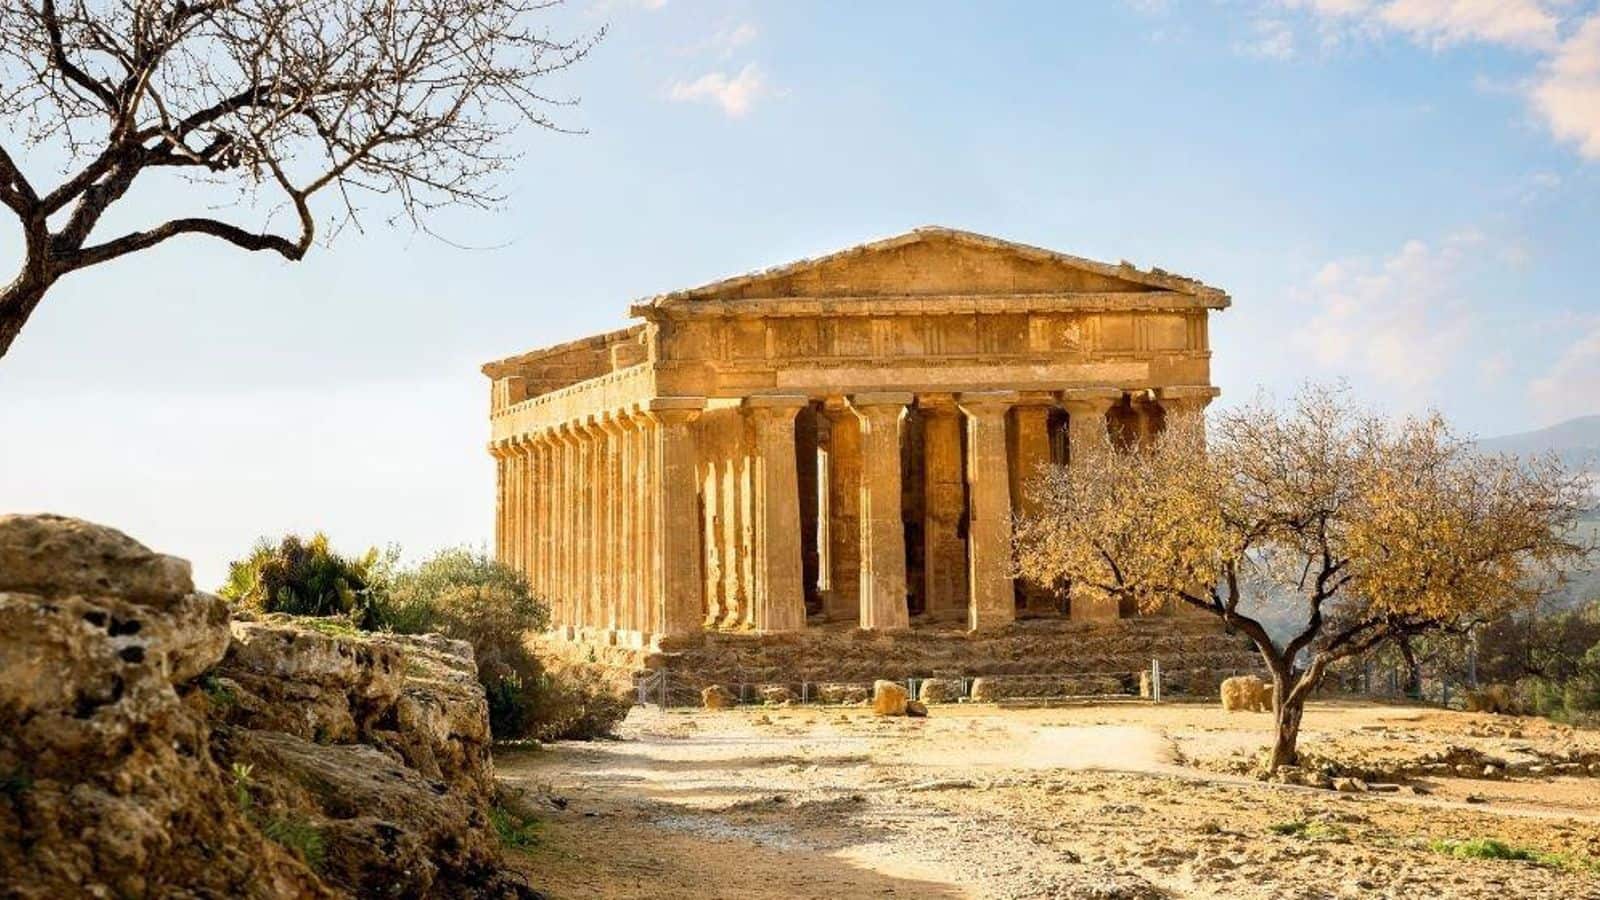 Go for Sicily's ancient Greek ruins road trip